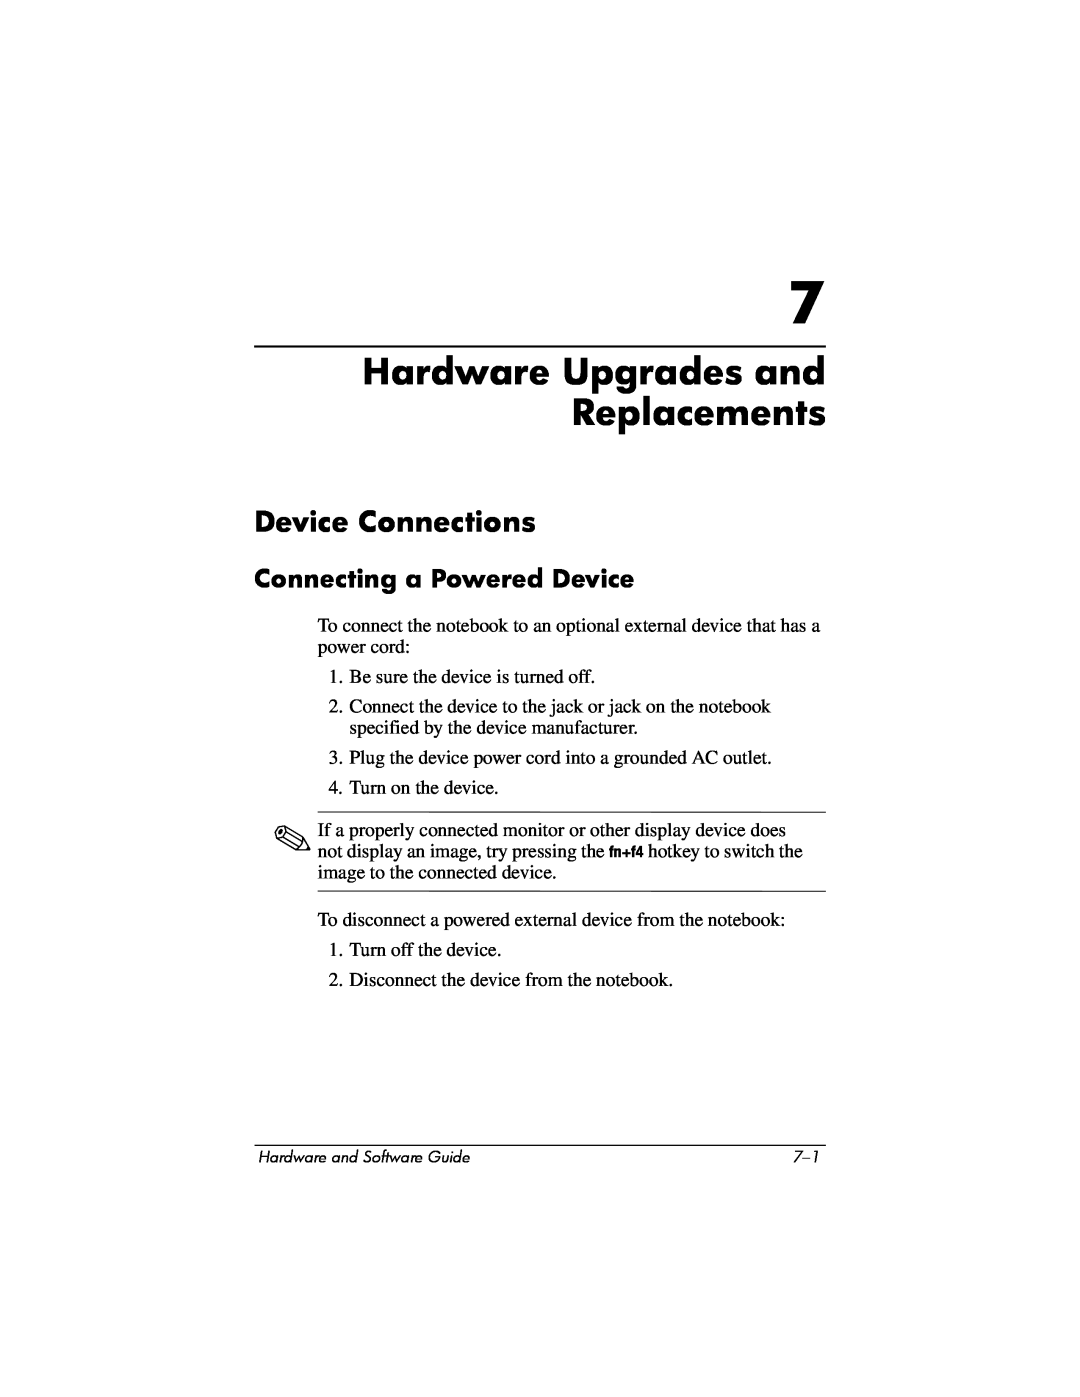 Compaq Presario M2000 manual Hardware Upgrades and Replacements, Device Connections, Connecting a Powered Device 